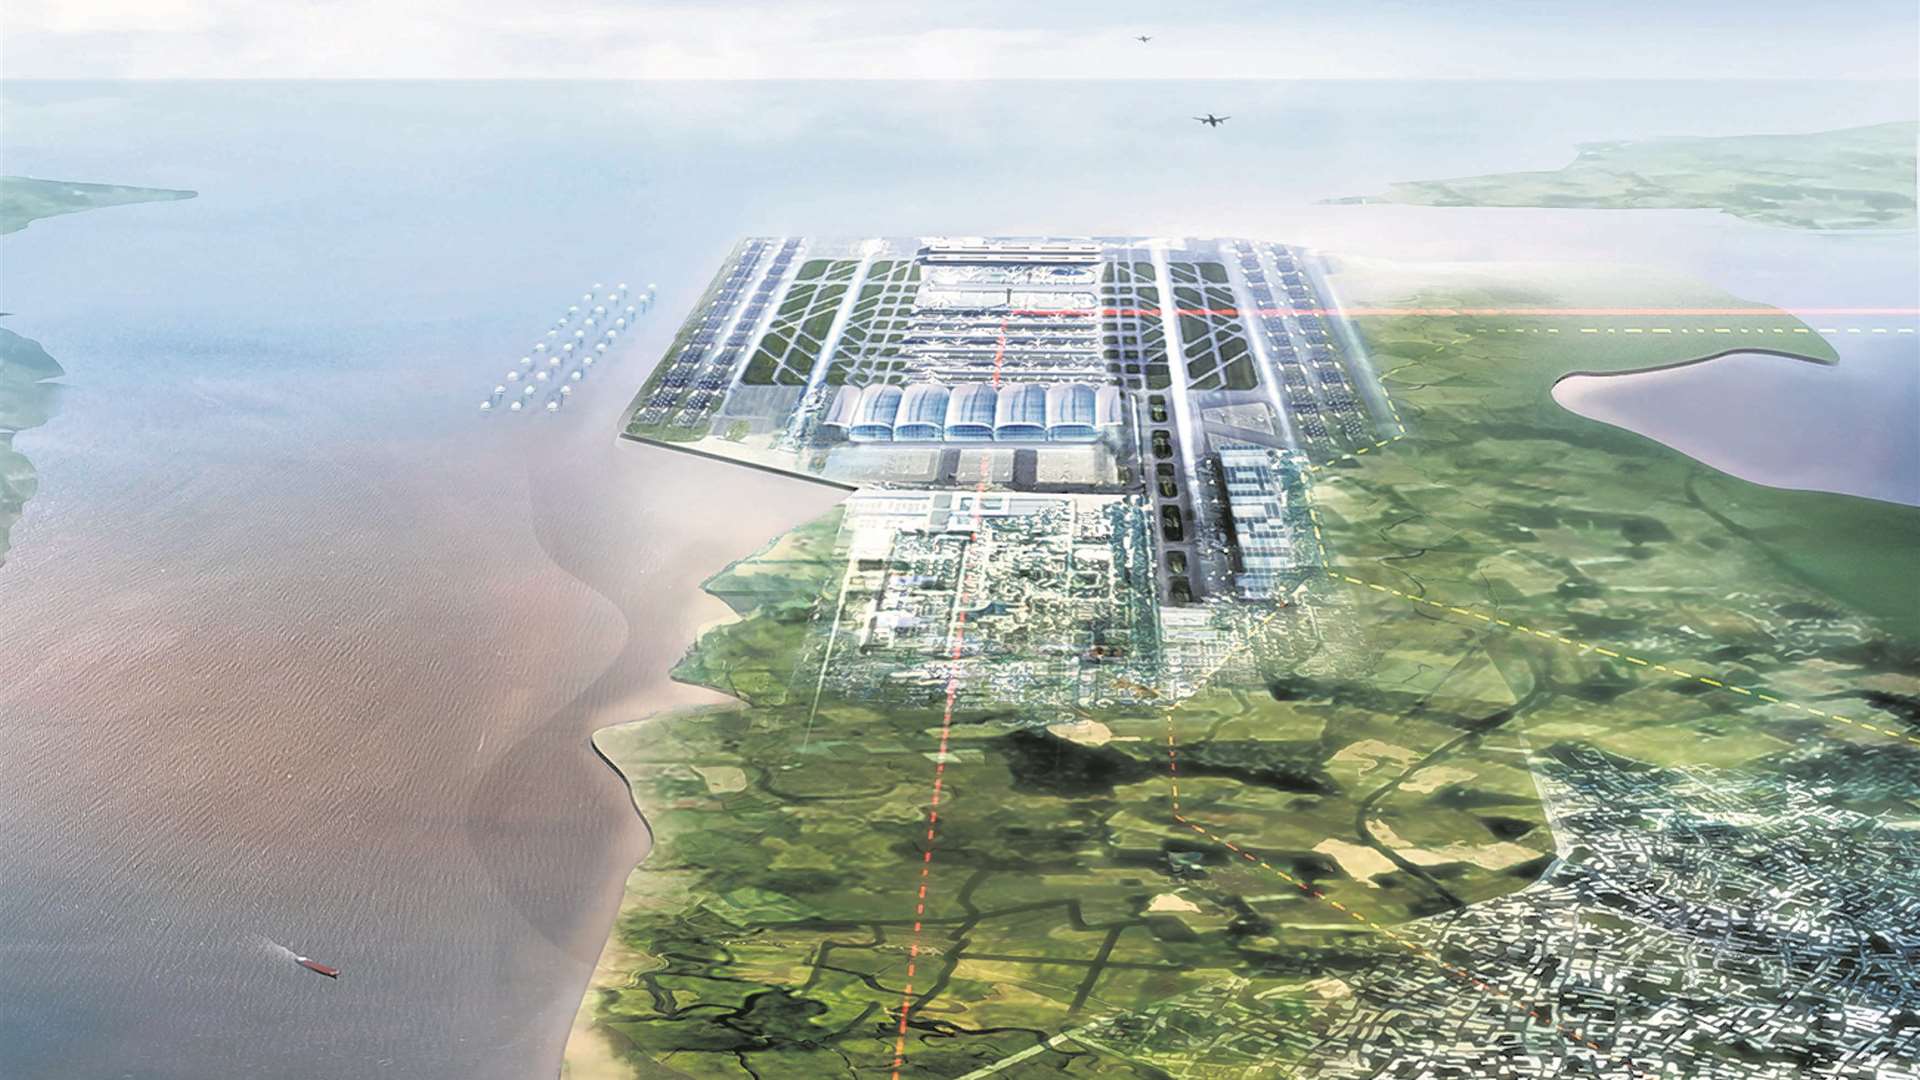 How architect Lord Foster's vision for an airport at Grain in the Thames Estuary could have looked